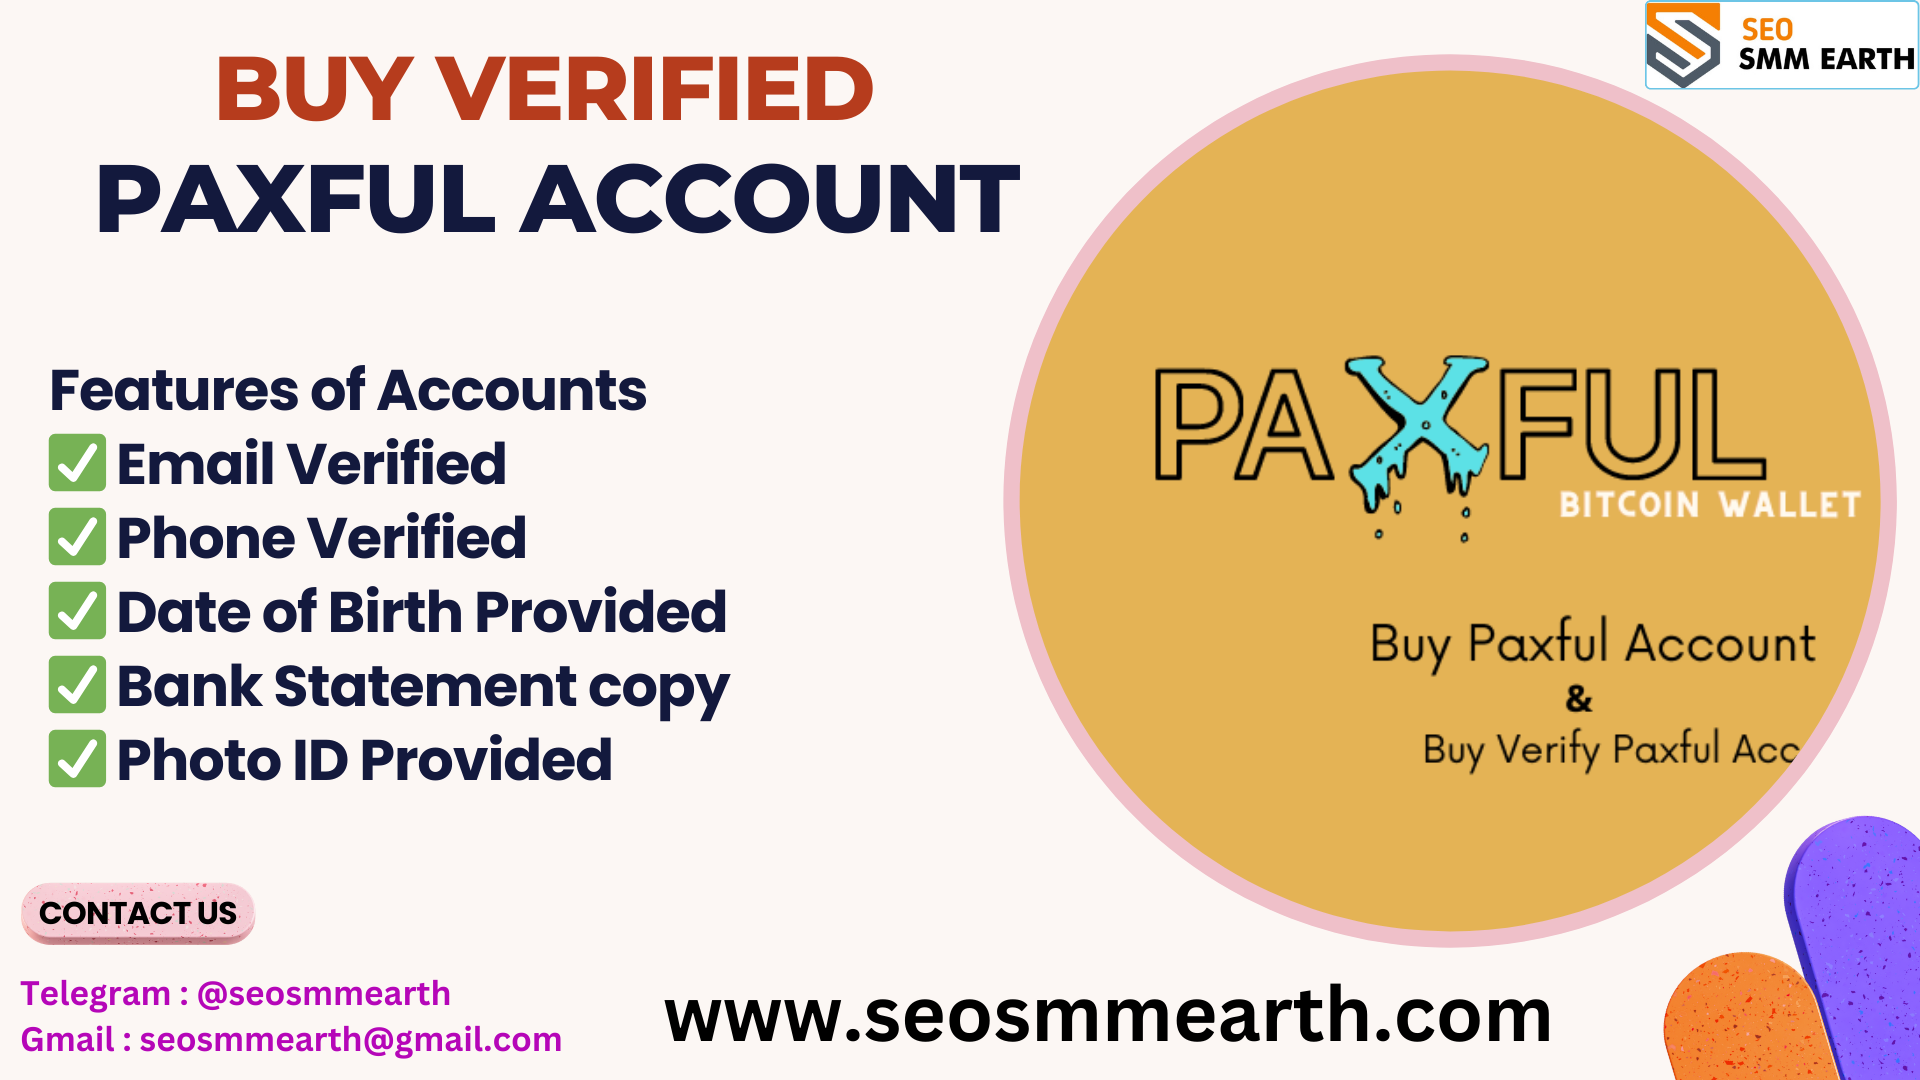 Buy Verified Paxful Account - 100% Positive Paxful Account